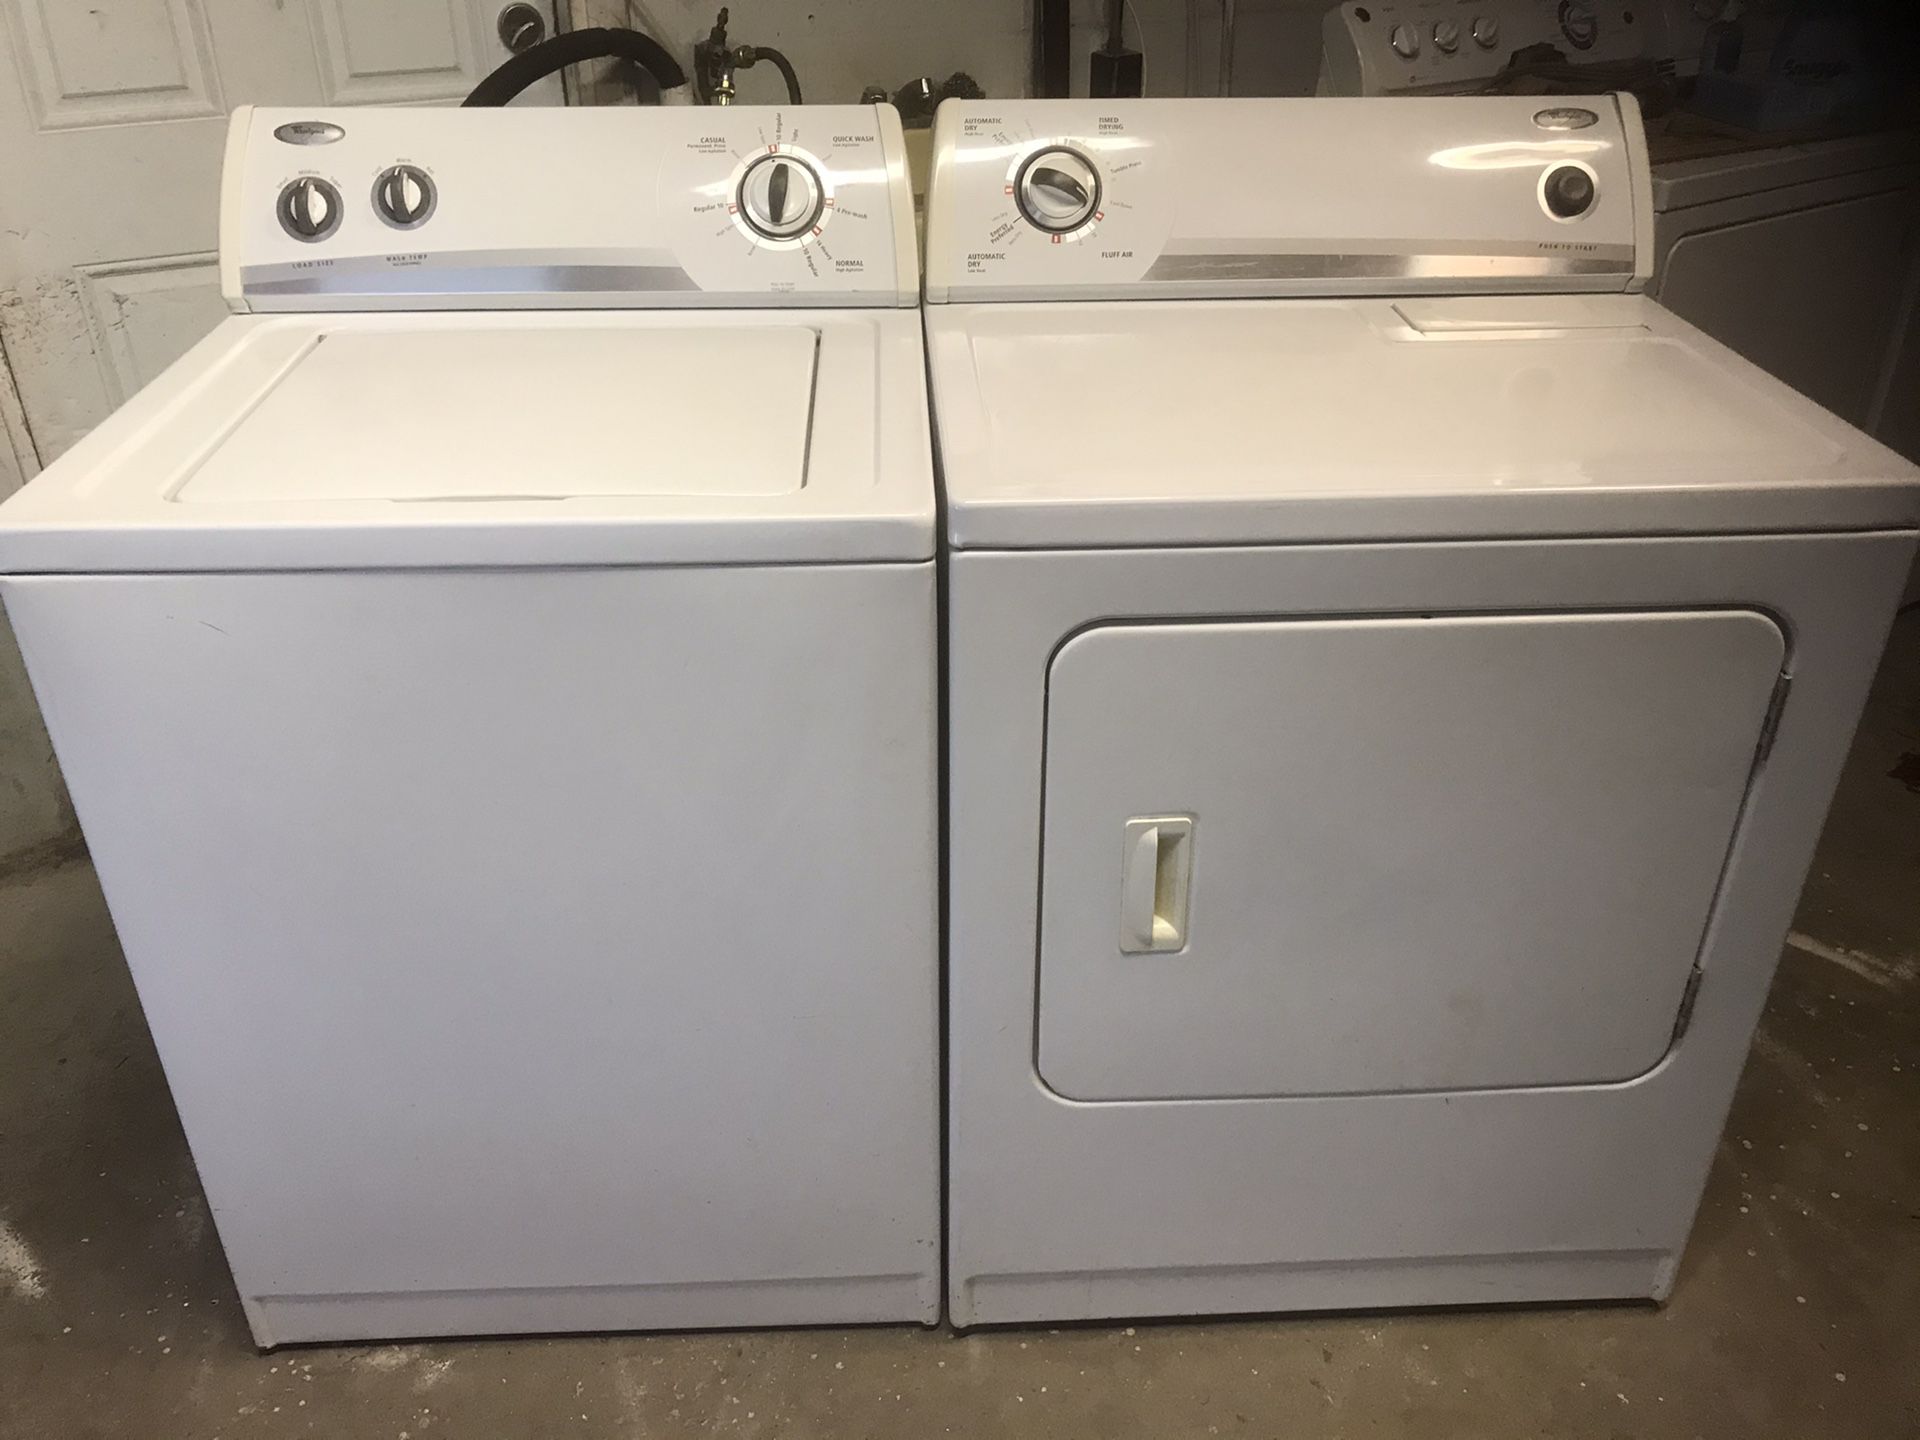 WHIRLPOOL WASHER AND DRYER FOR SALE